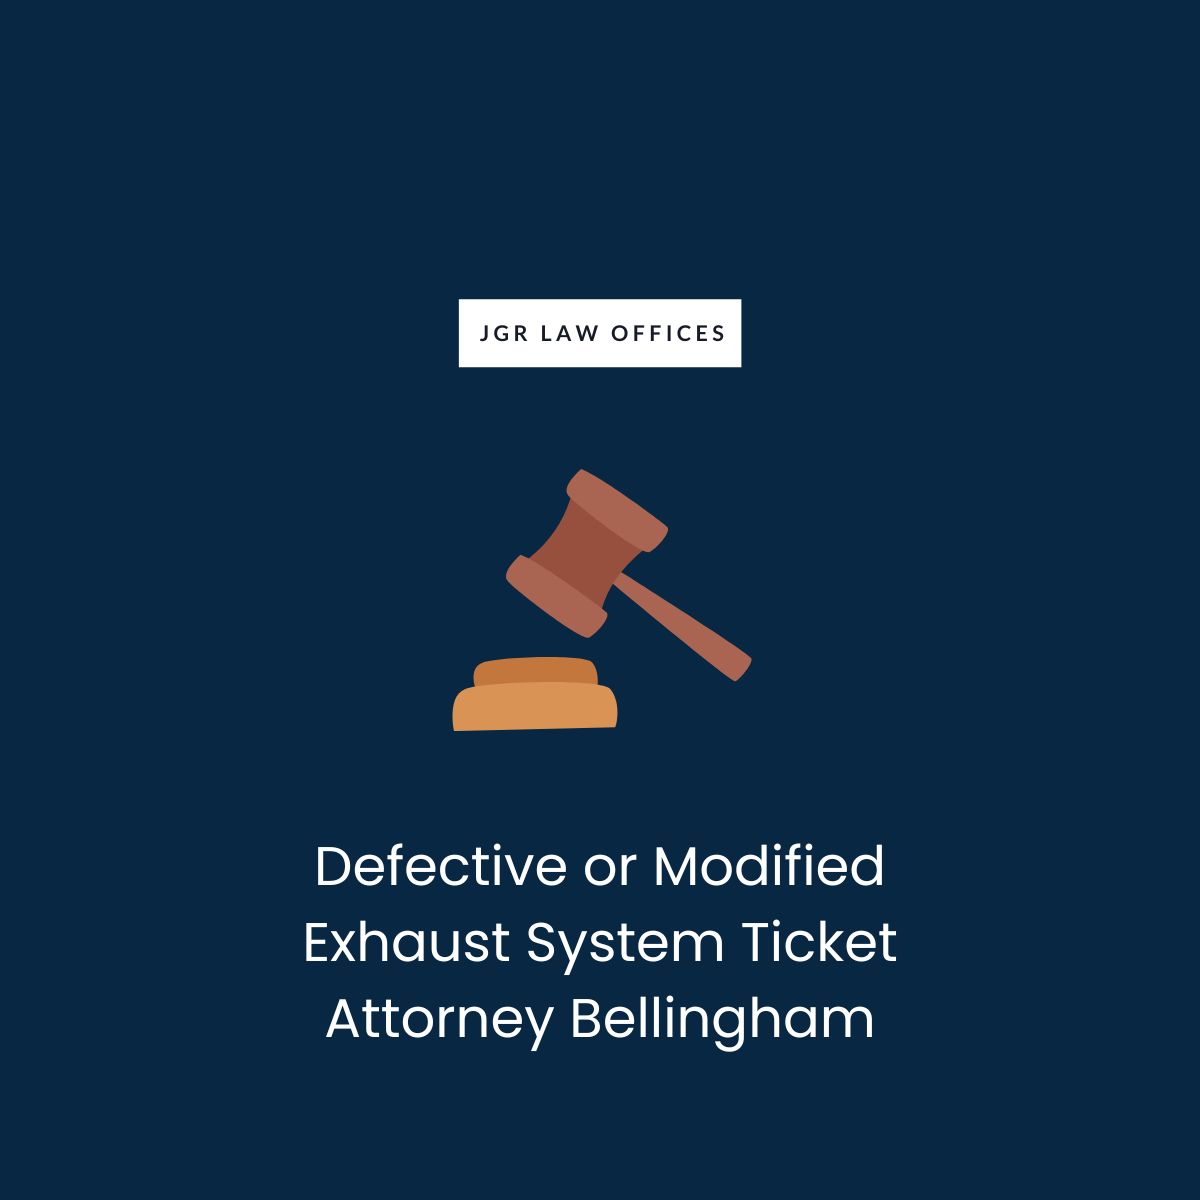 Defective or Modified Exhaust System Ticket Attorney Bellingham